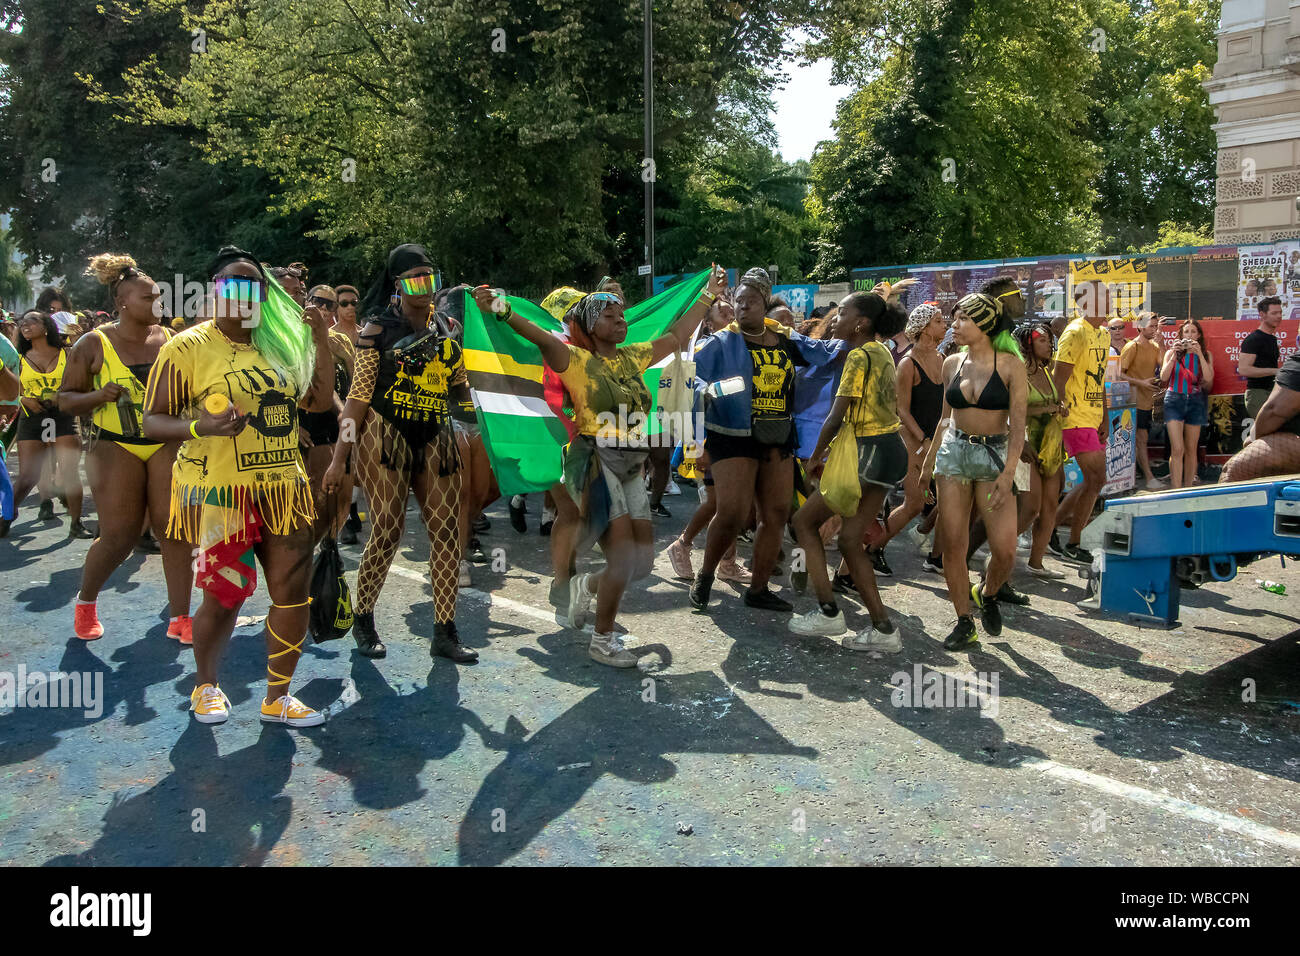 Masqueraders moving along a road. The main events of Notting Hill Carnival 2019 got underway on Sunday, with over a million revellers hitting the streets of West London, amongst floats, masqueraders, steel bands, and sound systems. Stock Photo